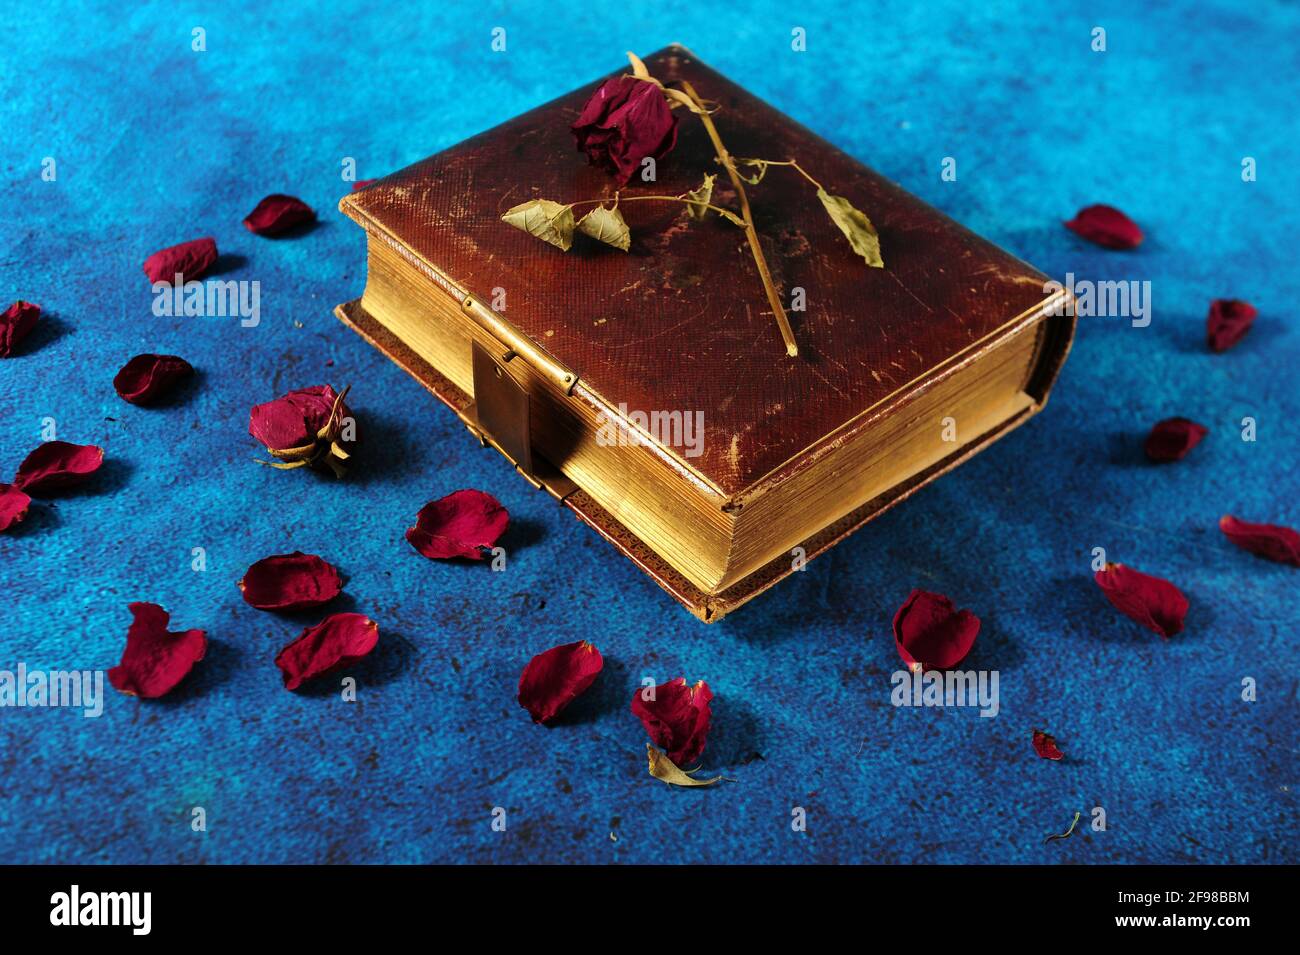 Closeup shot of an old brown book surrounded by faded rose on a blue rough surface Stock Photo